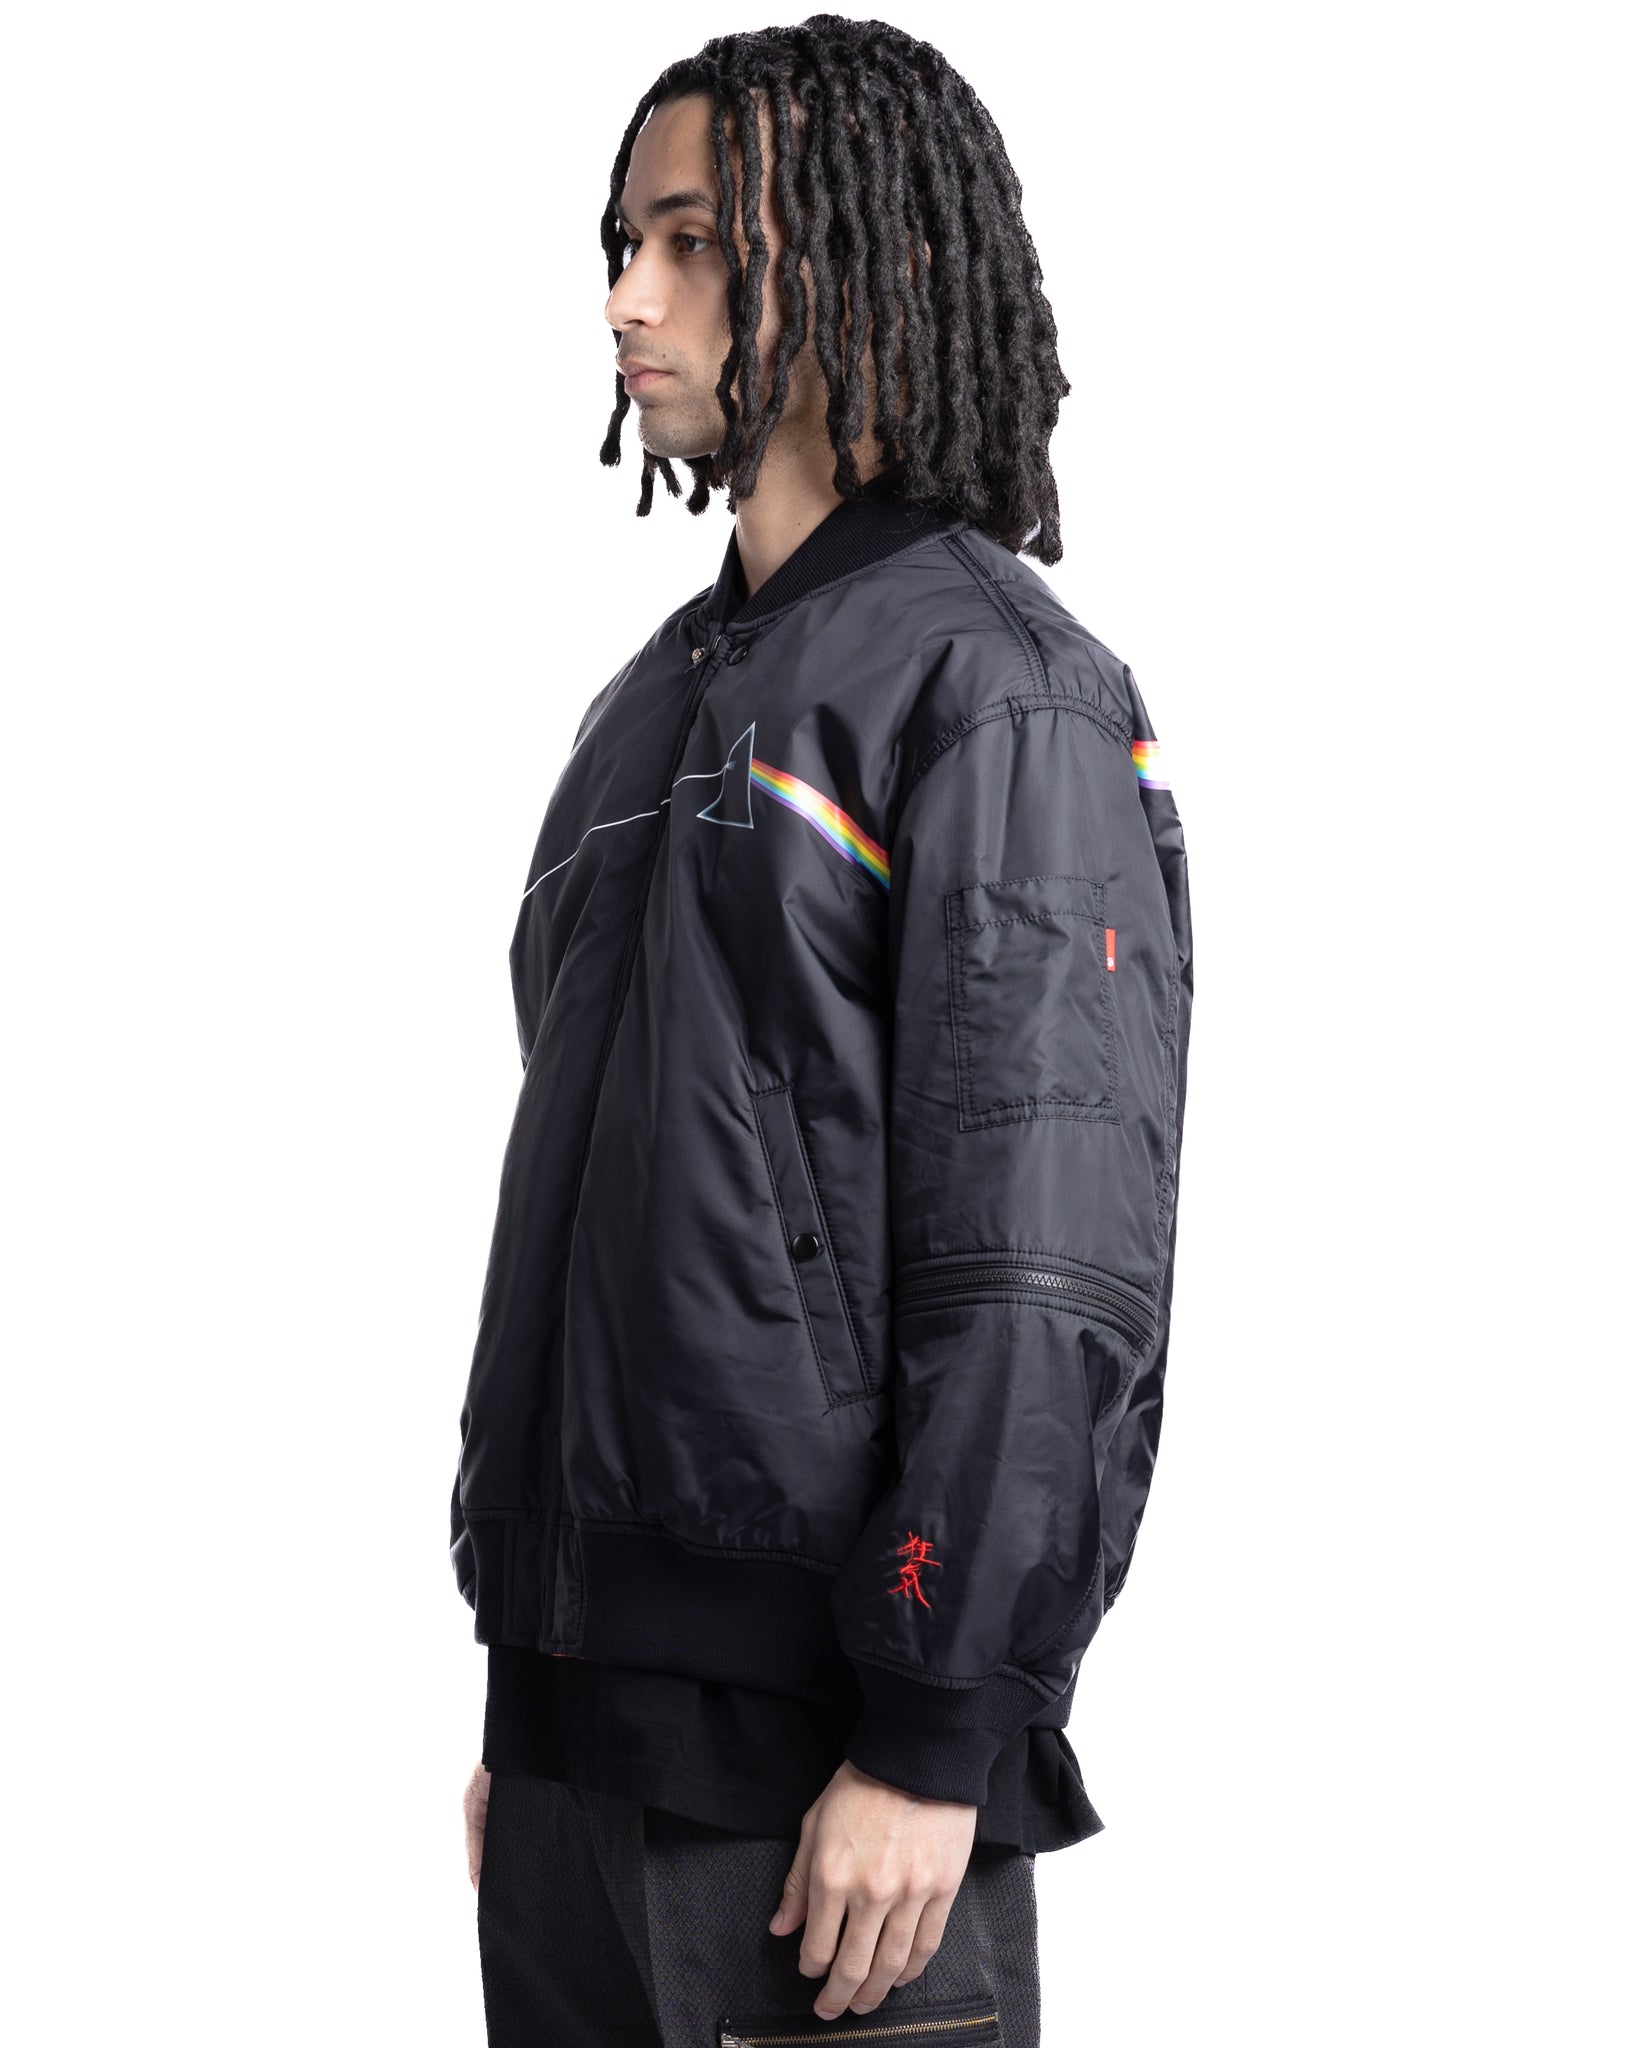 Undercover UC1C4207-1 Pink Floyd Convertible Bomber Black